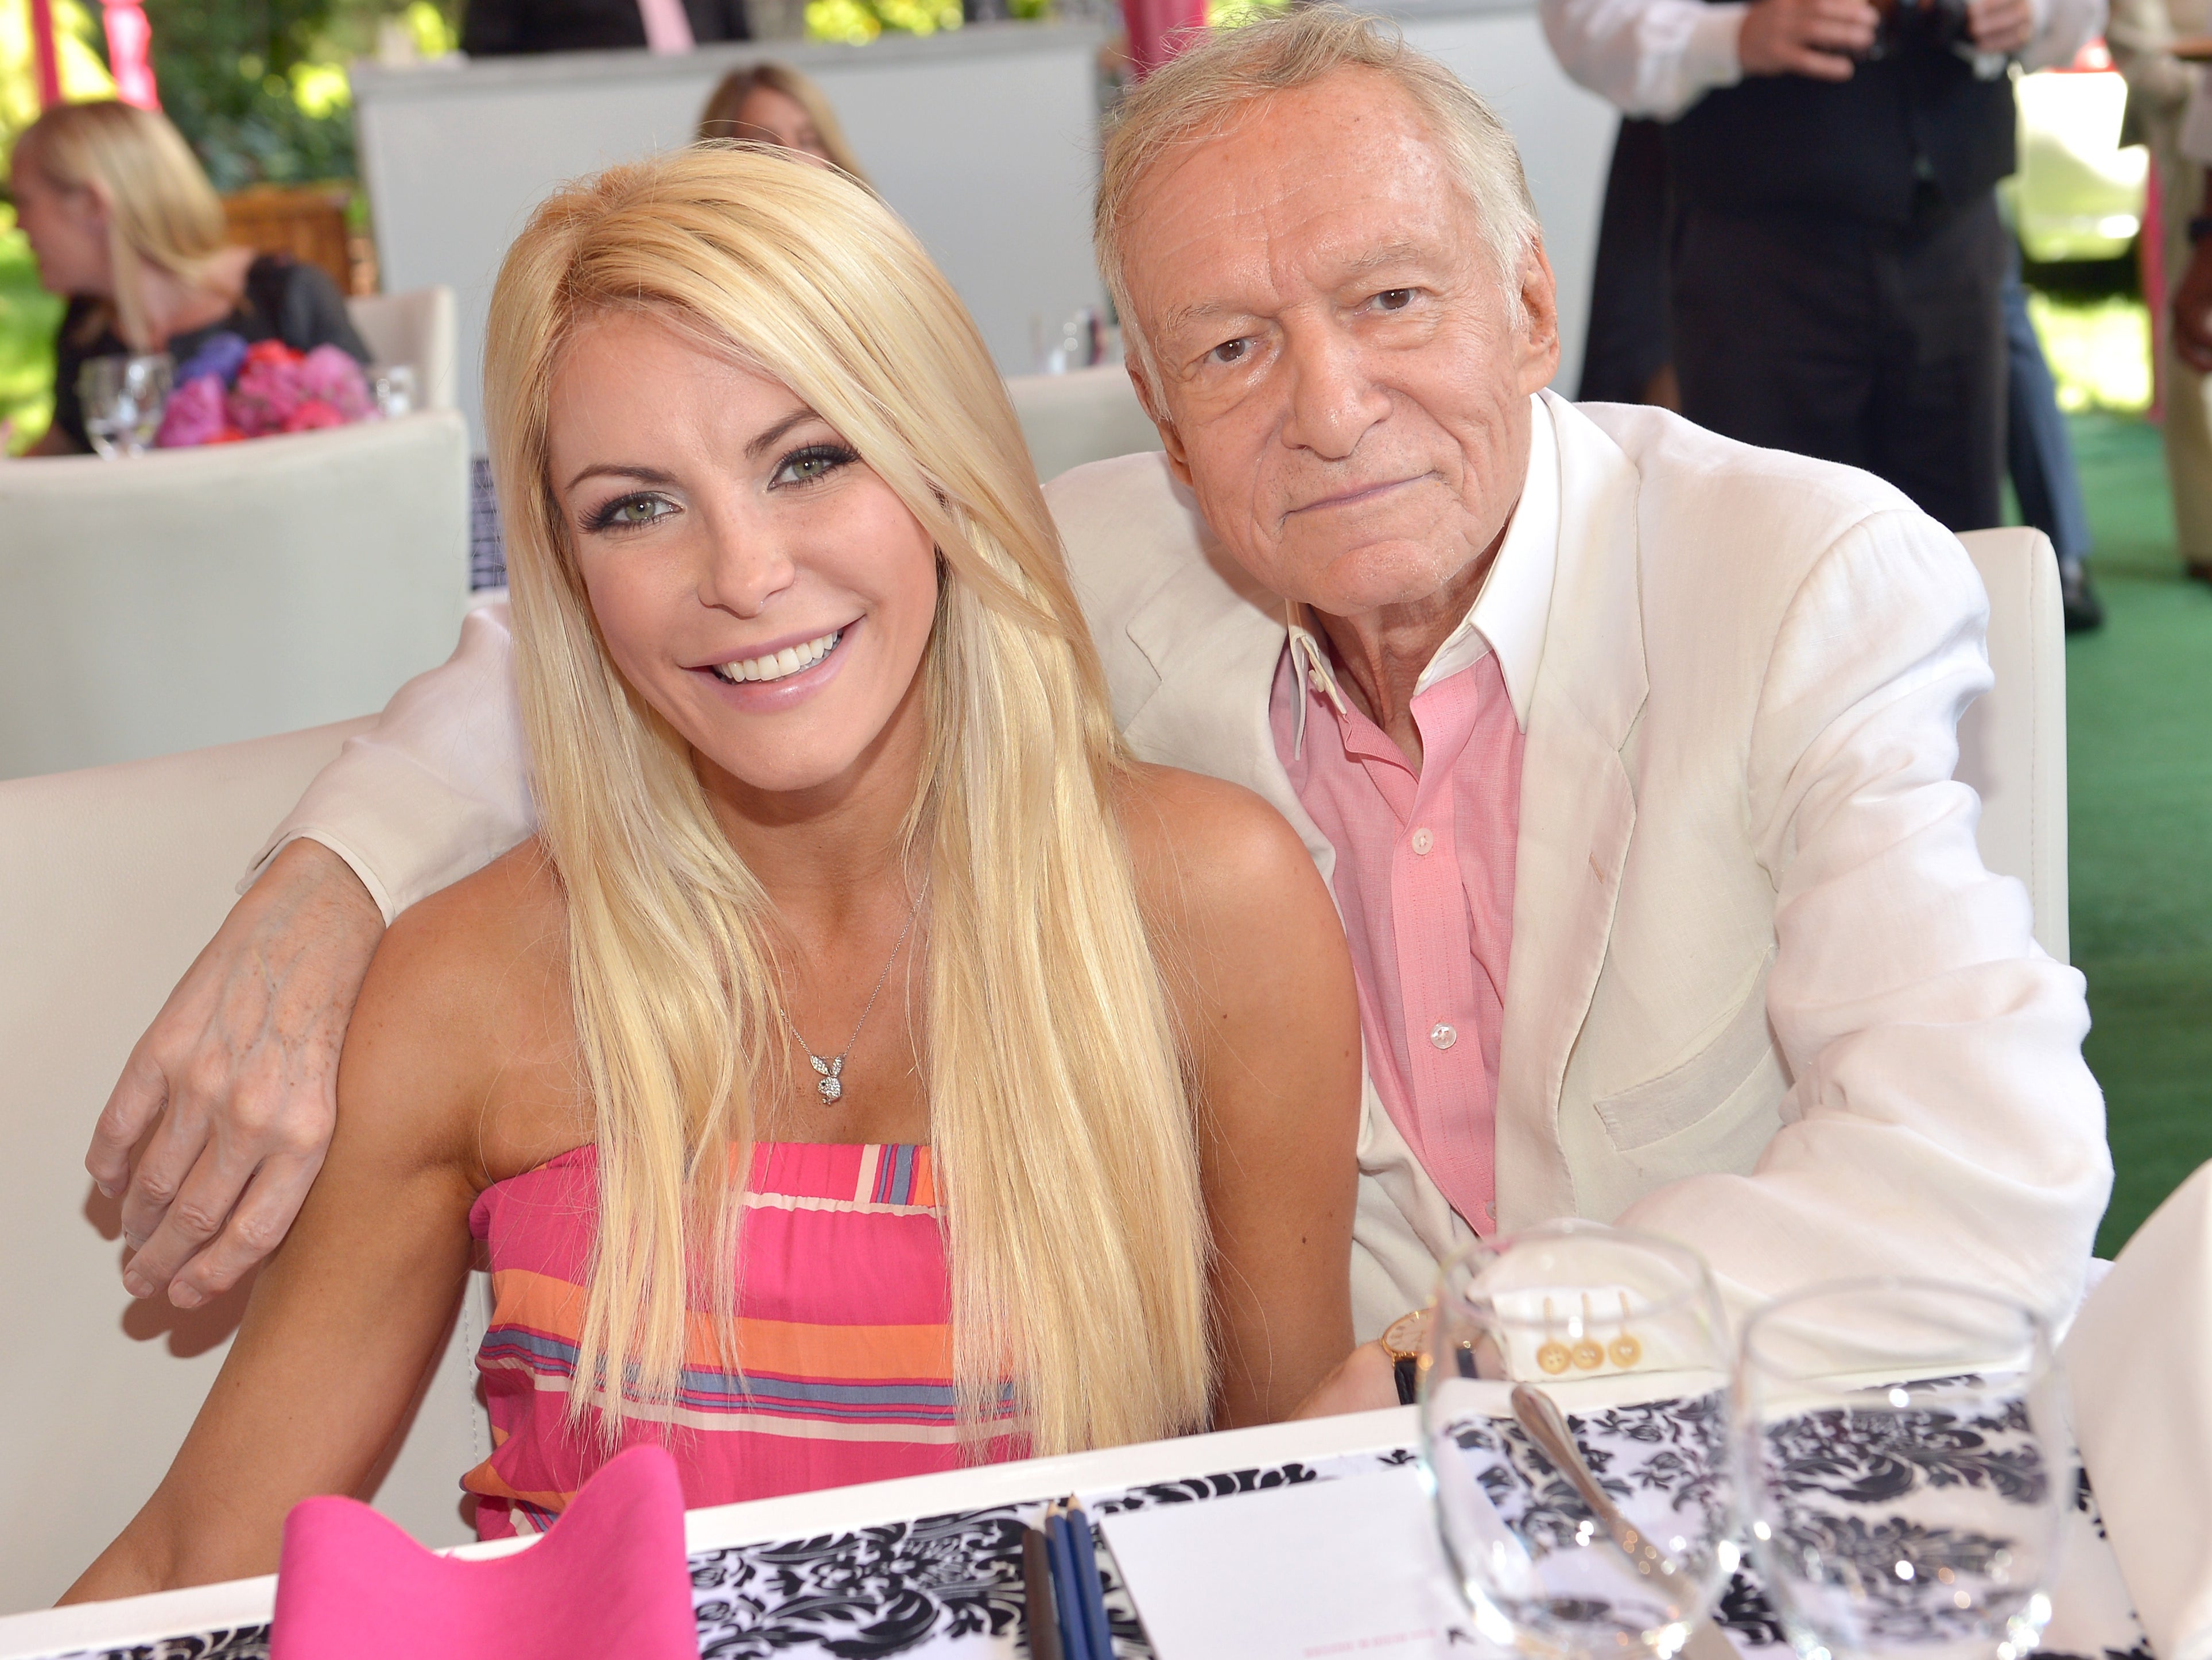 Hugh Hefner and his wife Crystal Hefner attend Playboy’s 2013 Playmate of the Year luncheon on 9 May 2013 at the Playboy mansion